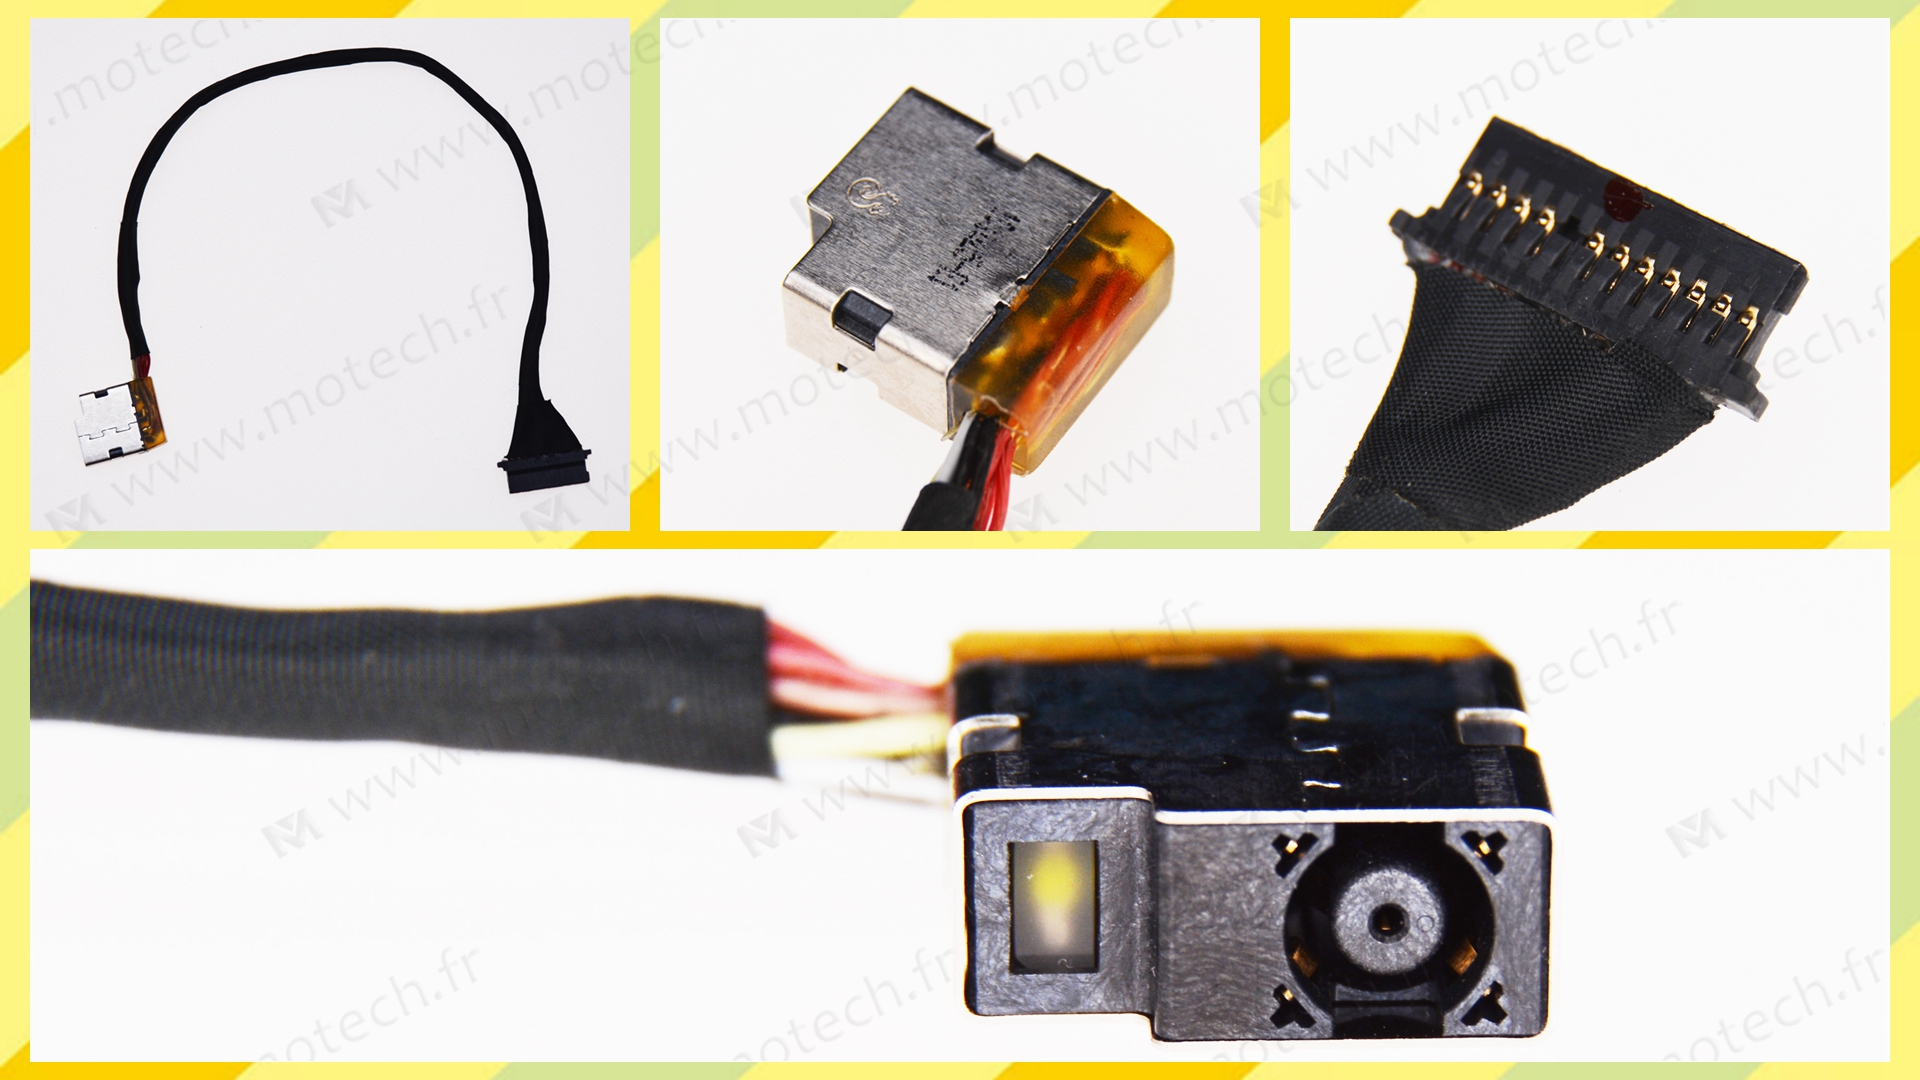 HP 17-an009nf charging connector, HP 17-an009nf DC Power Jack, HP 17-an009nf DC IN Cable, HP 17-an009nf Power Jack, HP 17-an009nf plug, HP 17-an009nf Jack socket, HP 17-an009nf connecteur de charge, 